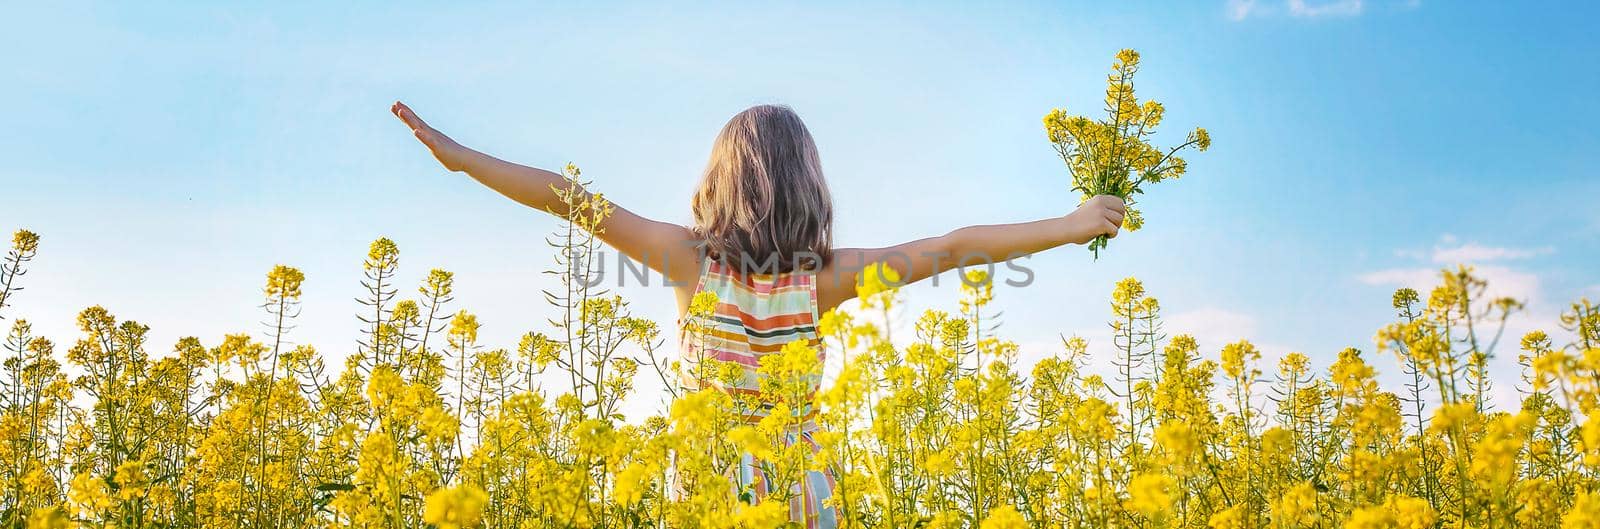 A child in a yellow field, mustard blooms. Selective focus. nature.